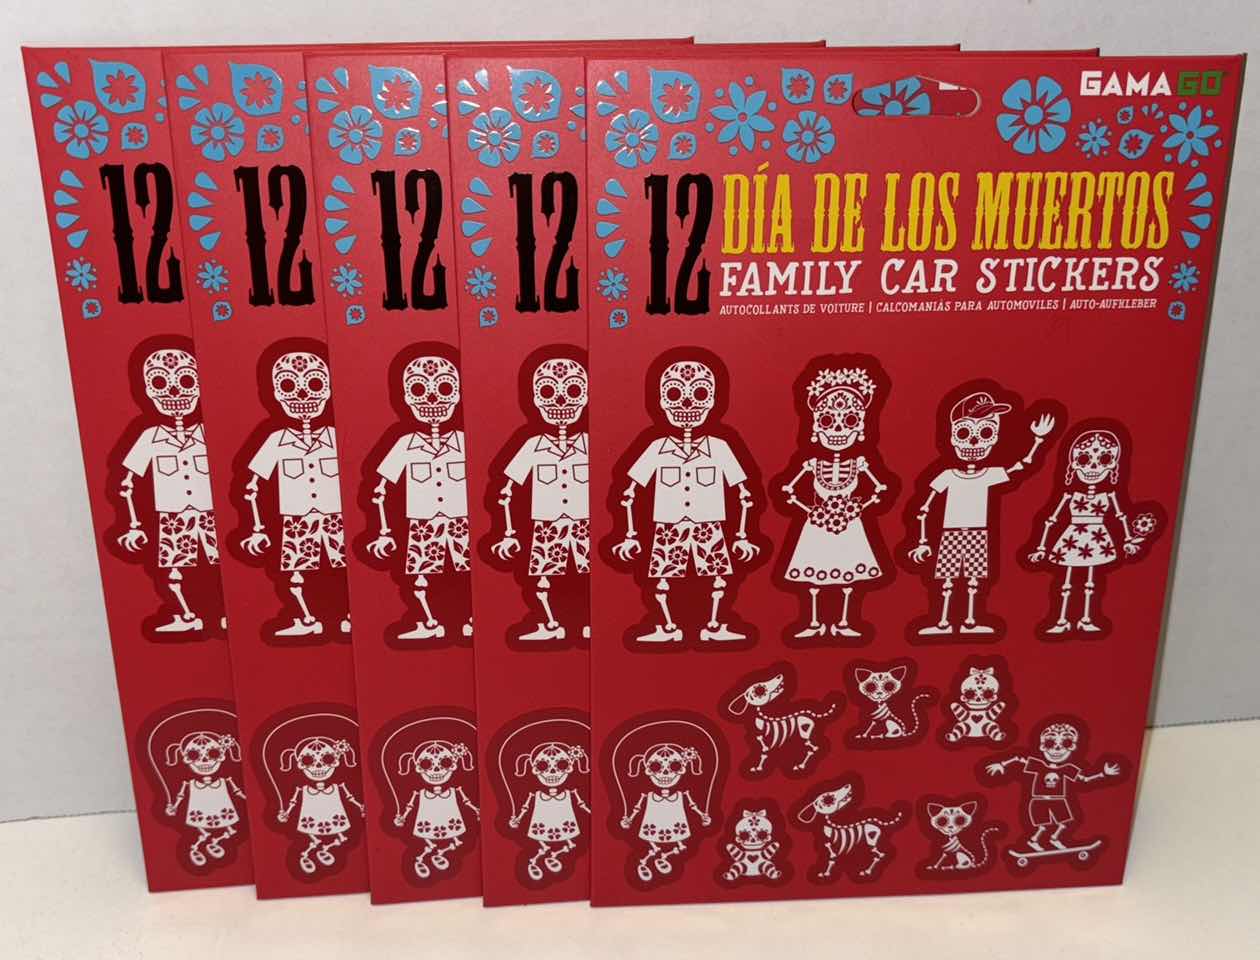 Photo 1 of NEW 5-PACK GAMA GO 12 DÍA DE LOS MUERTOS FAMILY CAR STICKERS PACK